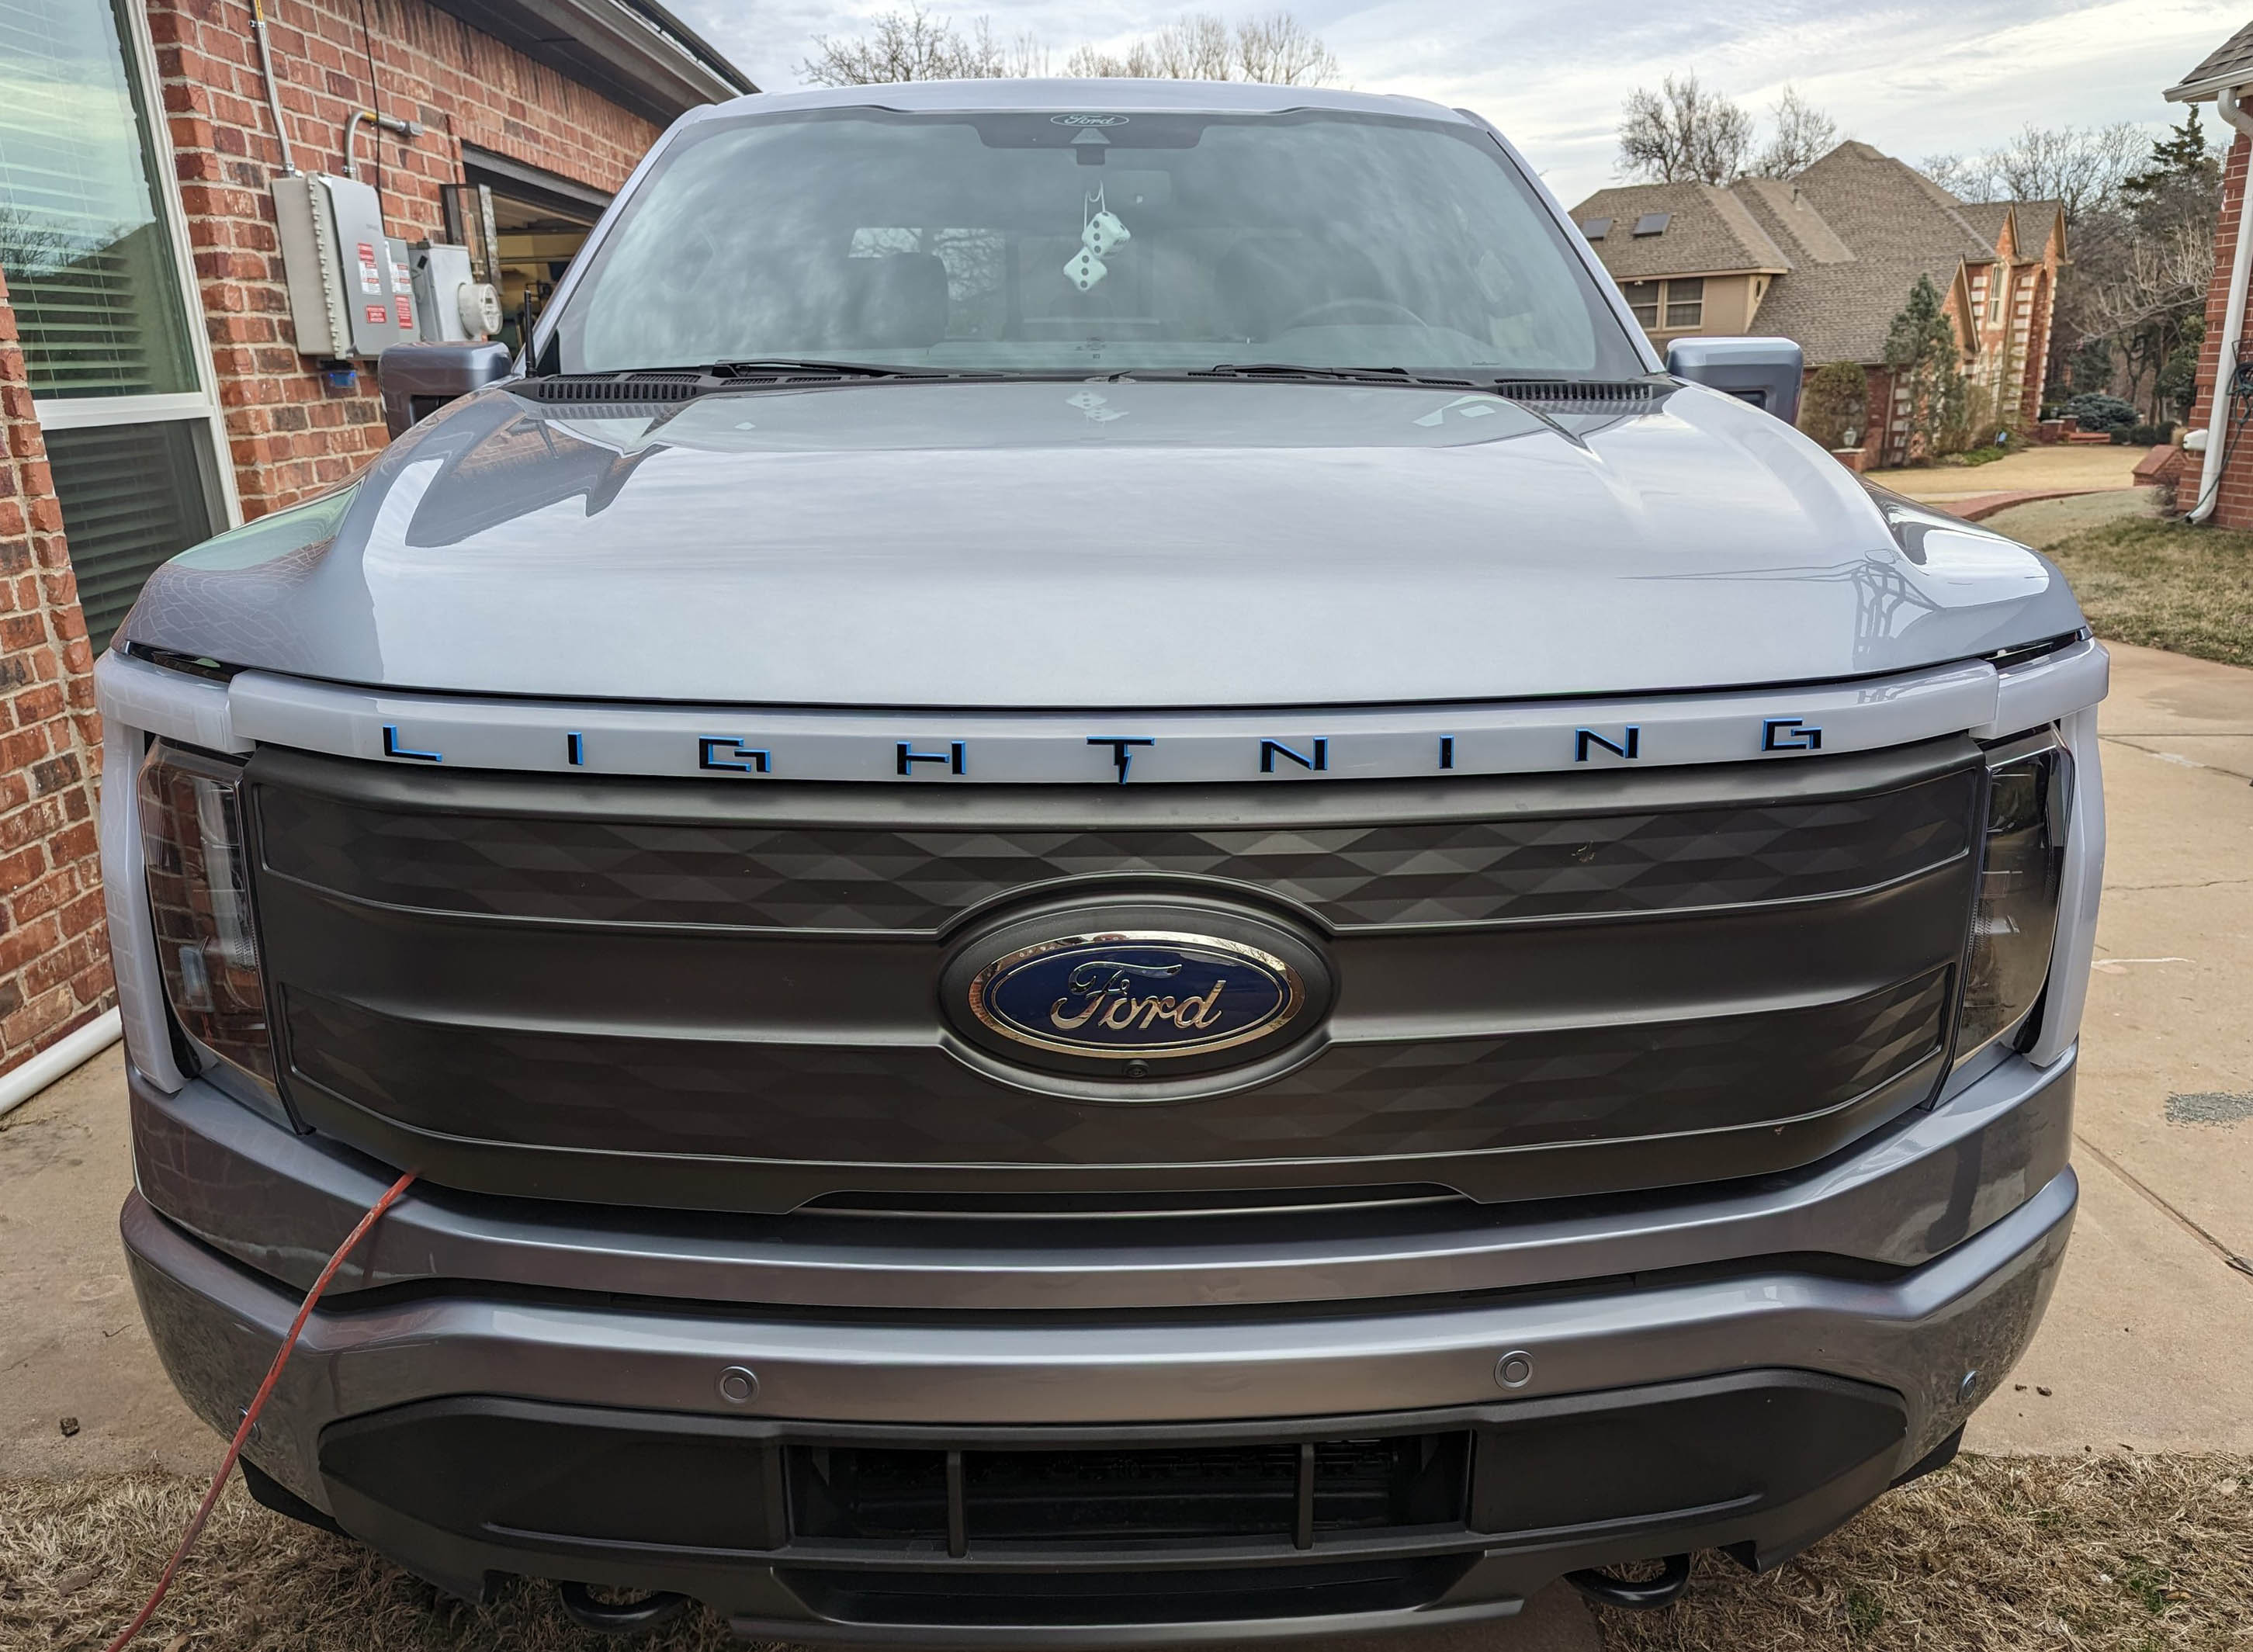 Ford F-150 Lightning A different take on the light bar -- Lightning letters f150lightningletters-lightbar